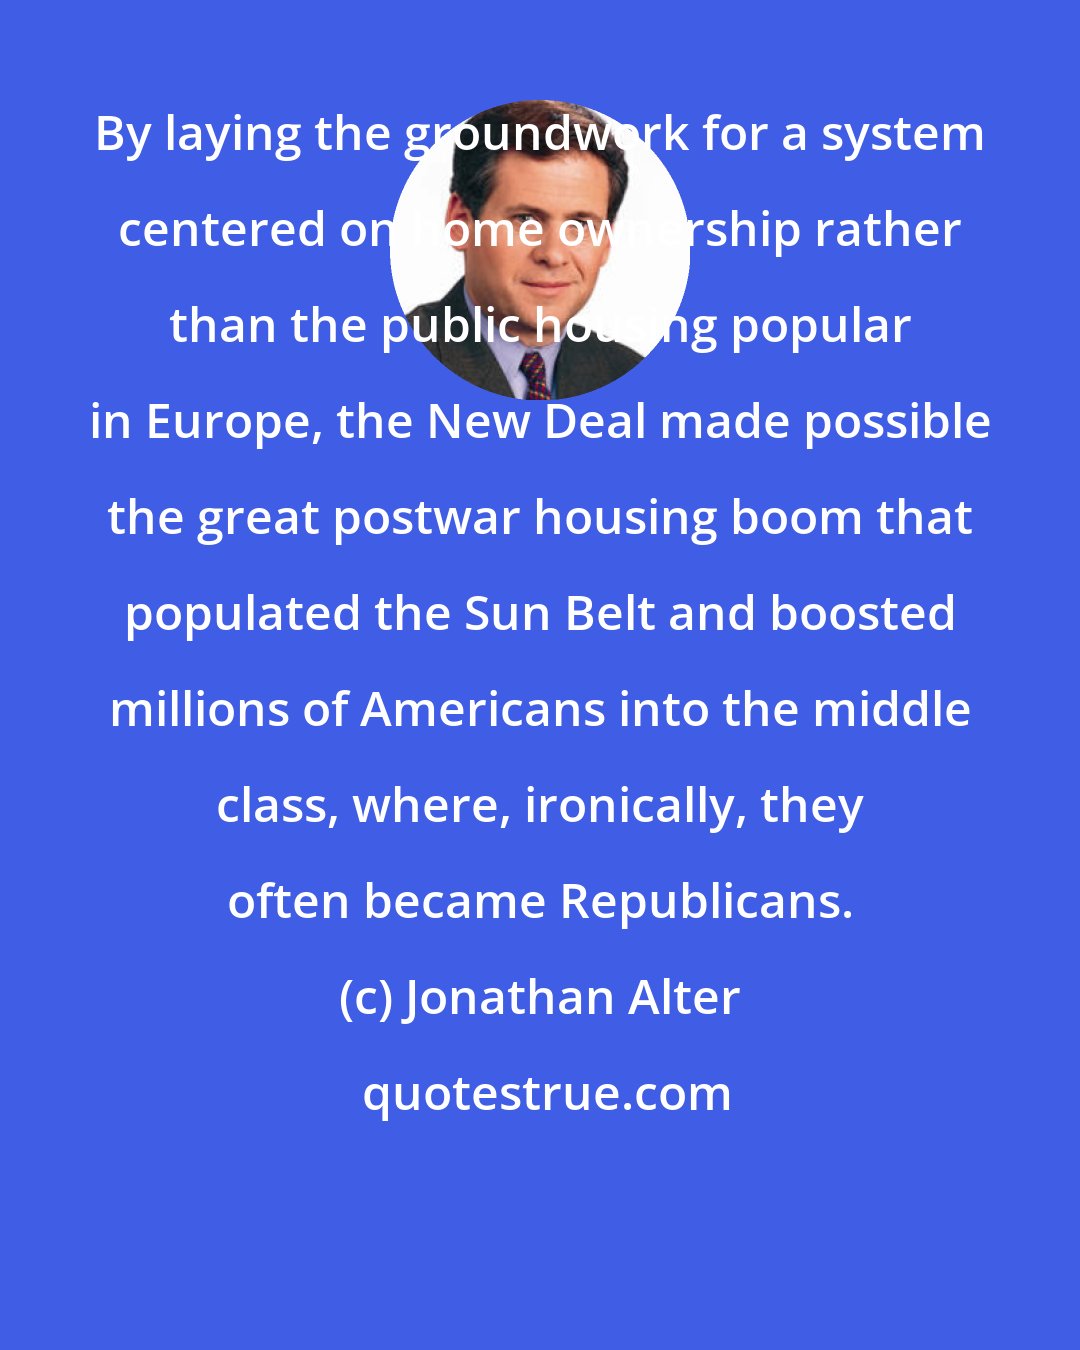 Jonathan Alter: By laying the groundwork for a system centered on home ownership rather than the public housing popular in Europe, the New Deal made possible the great postwar housing boom that populated the Sun Belt and boosted millions of Americans into the middle class, where, ironically, they often became Republicans.